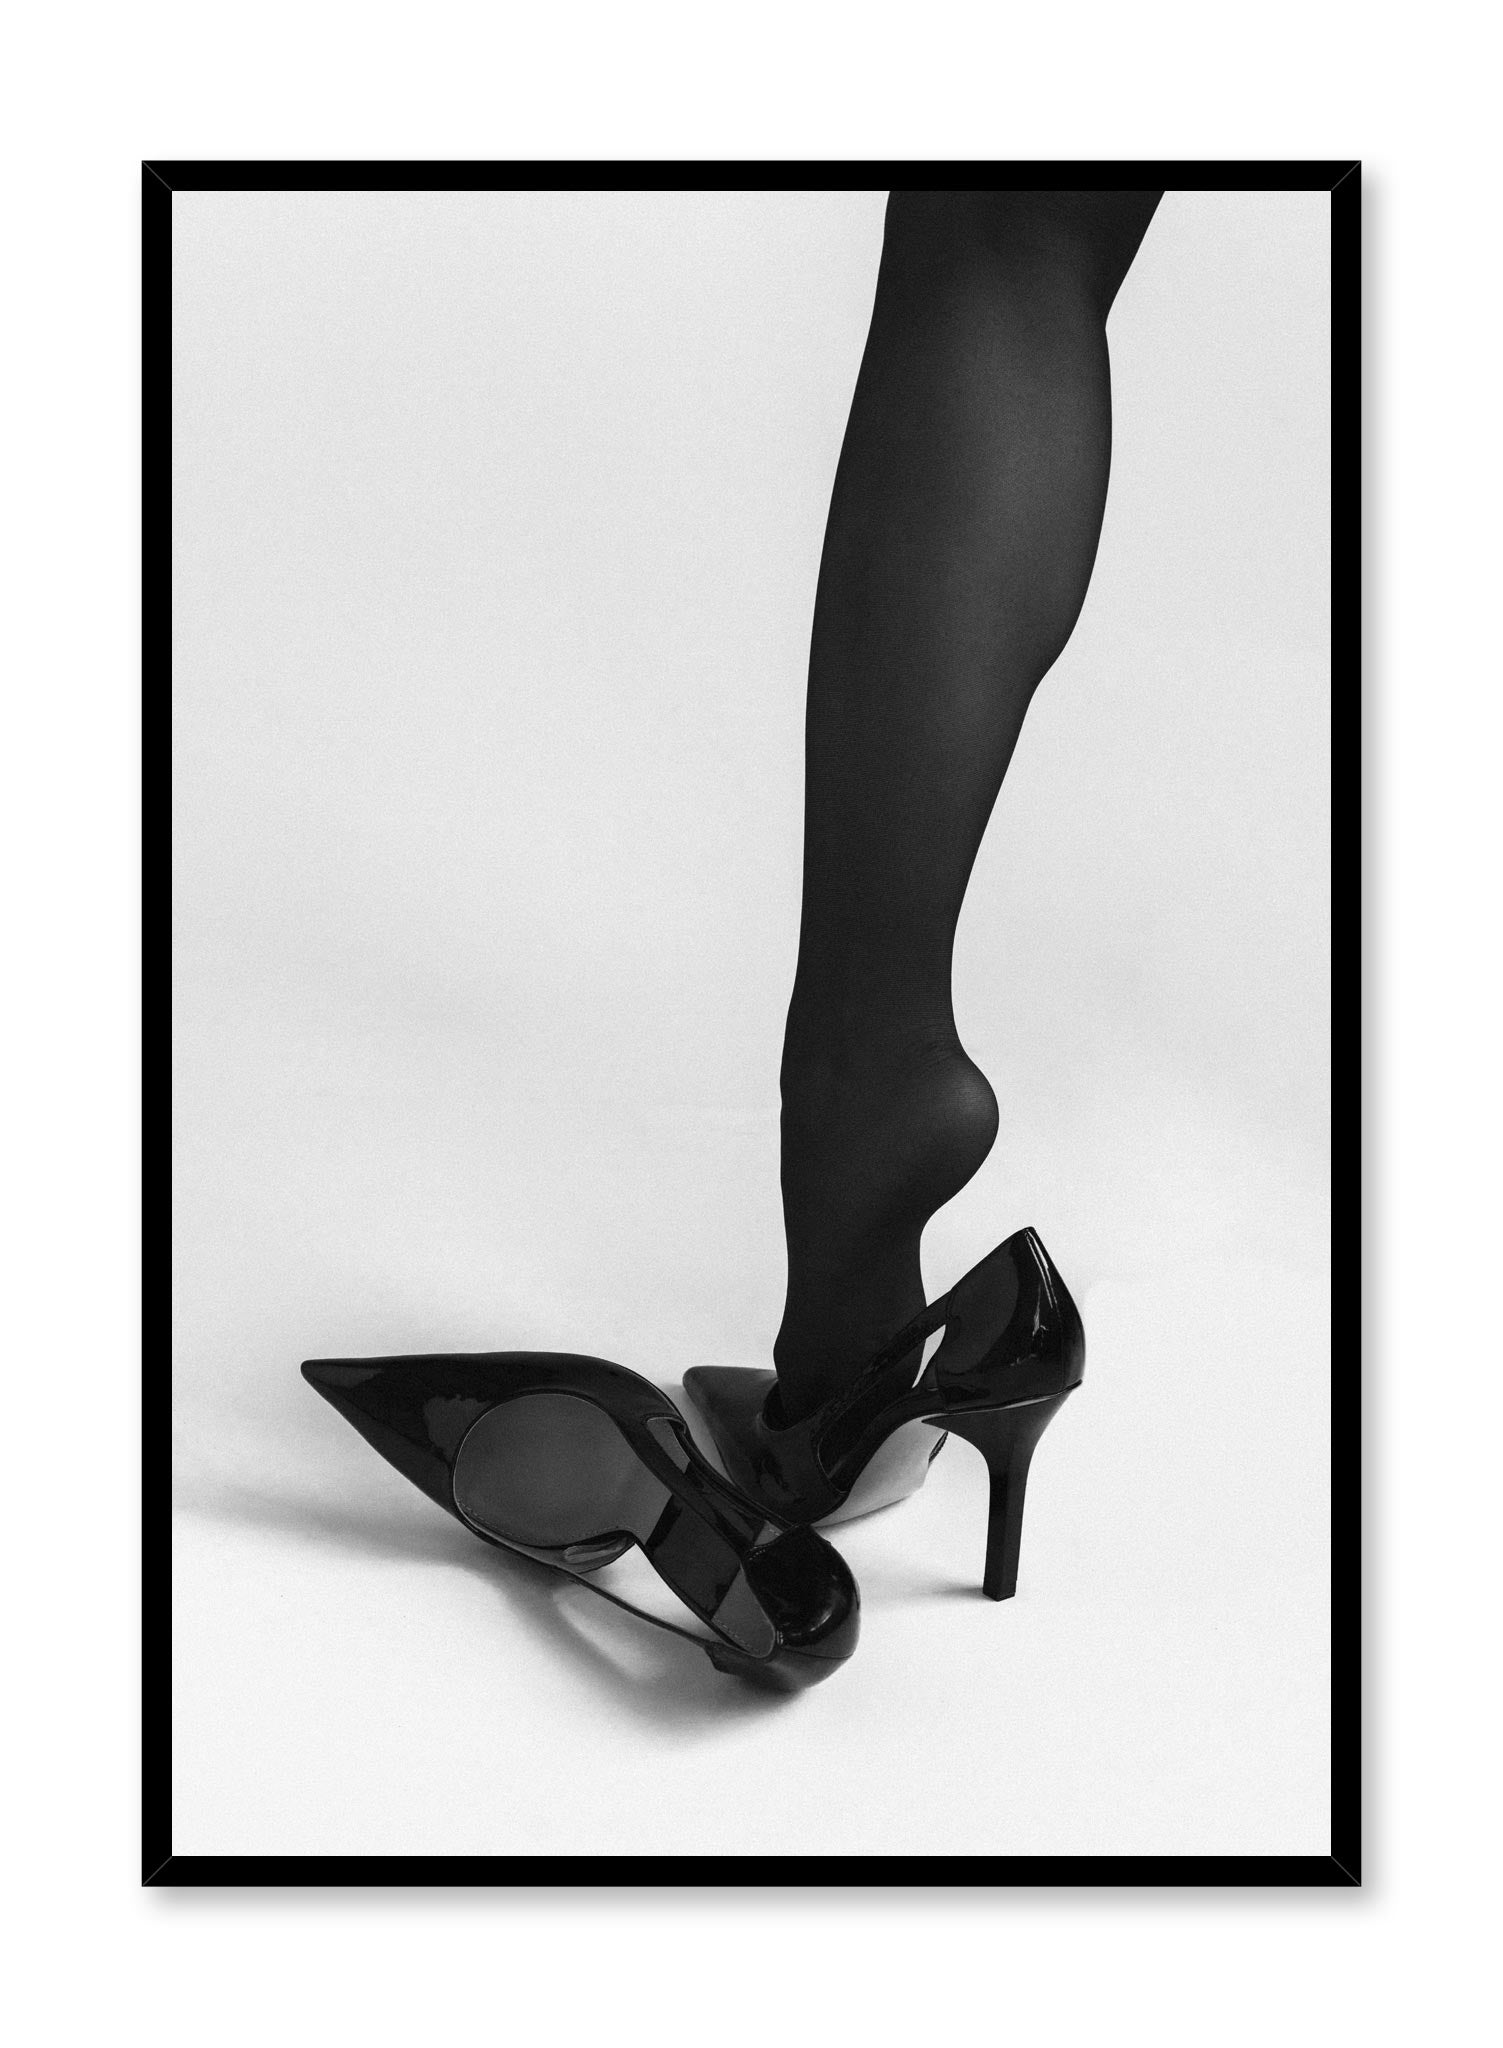 Black and white fashion photography poster by Opposite Wall with woman in high heels